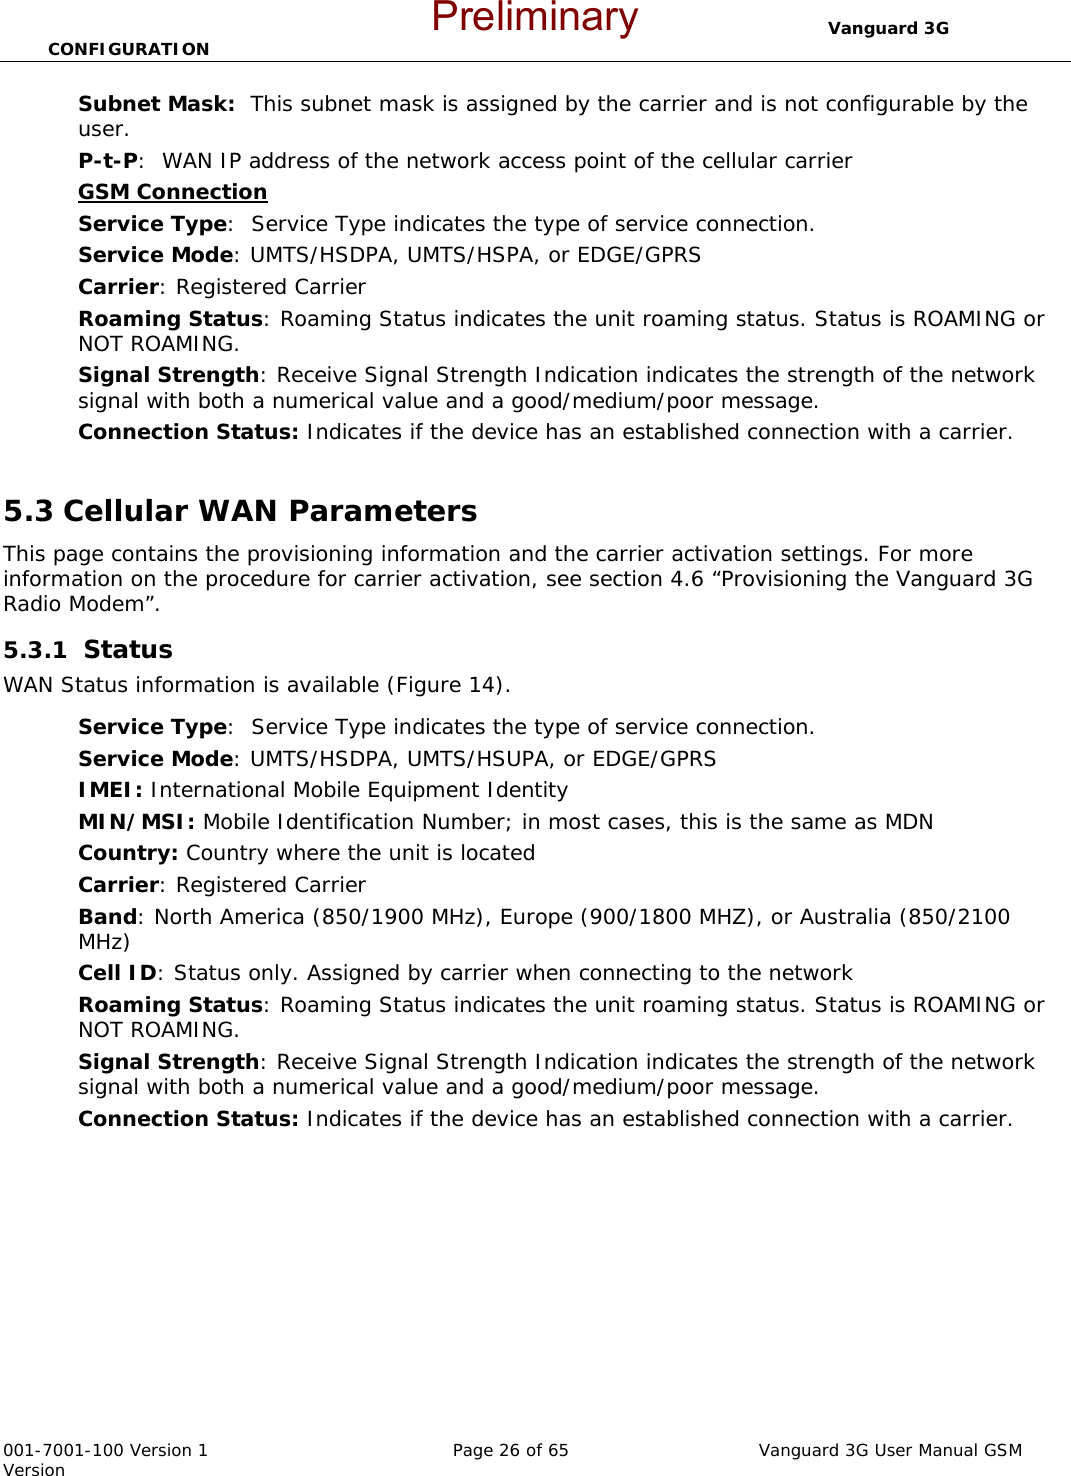                                  Vanguard 3G CONFIGURATION  001-7001-100 Version 1       Page 26 of 65       Vanguard 3G User Manual GSM Version Subnet Mask:  This subnet mask is assigned by the carrier and is not configurable by the user.   P-t-P:  WAN IP address of the network access point of the cellular carrier GSM Connection  Service Type:  Service Type indicates the type of service connection.  Service Mode: UMTS/HSDPA, UMTS/HSPA, or EDGE/GPRS  Carrier: Registered Carrier  Roaming Status: Roaming Status indicates the unit roaming status. Status is ROAMING or NOT ROAMING. Signal Strength: Receive Signal Strength Indication indicates the strength of the network signal with both a numerical value and a good/medium/poor message.   Connection Status: Indicates if the device has an established connection with a carrier.   5.3 Cellular WAN Parameters This page contains the provisioning information and the carrier activation settings. For more information on the procedure for carrier activation, see section 4.6 “Provisioning the Vanguard 3G Radio Modem”.    5.3.1  Status WAN Status information is available (Figure 14).  Service Type:  Service Type indicates the type of service connection.  Service Mode: UMTS/HSDPA, UMTS/HSUPA, or EDGE/GPRS  IMEI: International Mobile Equipment Identity MIN/MSI: Mobile Identification Number; in most cases, this is the same as MDN Country: Country where the unit is located  Carrier: Registered Carrier  Band: North America (850/1900 MHz), Europe (900/1800 MHZ), or Australia (850/2100 MHz) Cell ID: Status only. Assigned by carrier when connecting to the network Roaming Status: Roaming Status indicates the unit roaming status. Status is ROAMING or NOT ROAMING. Signal Strength: Receive Signal Strength Indication indicates the strength of the network signal with both a numerical value and a good/medium/poor message.   Connection Status: Indicates if the device has an established connection with a carrier.   Preliminary